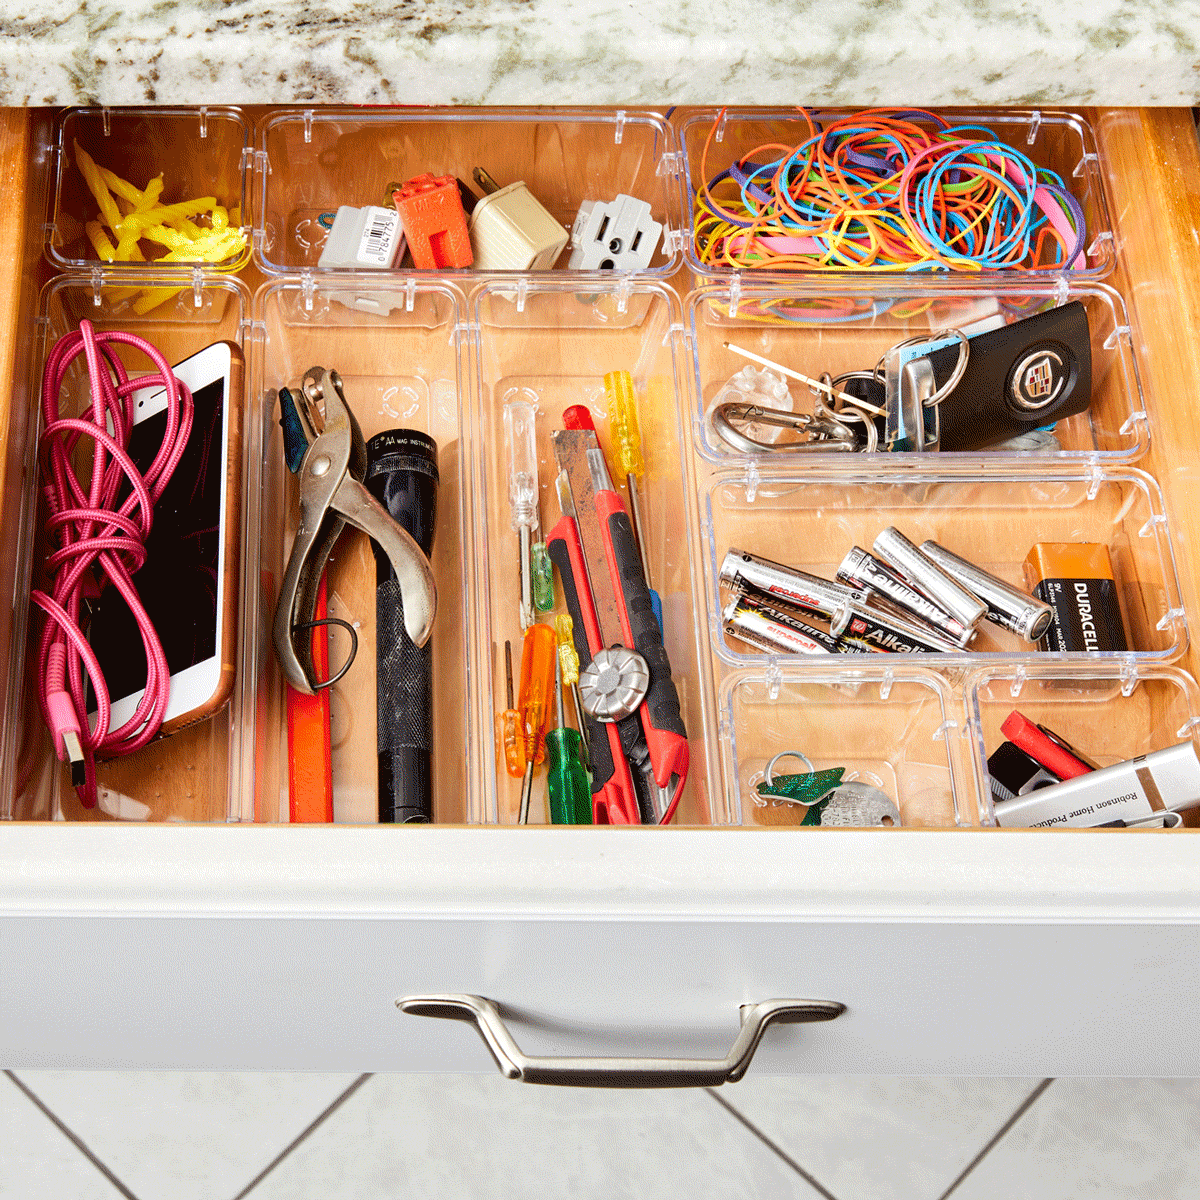 How to Actually Organize a Junk Drawer in 8 Simple Steps